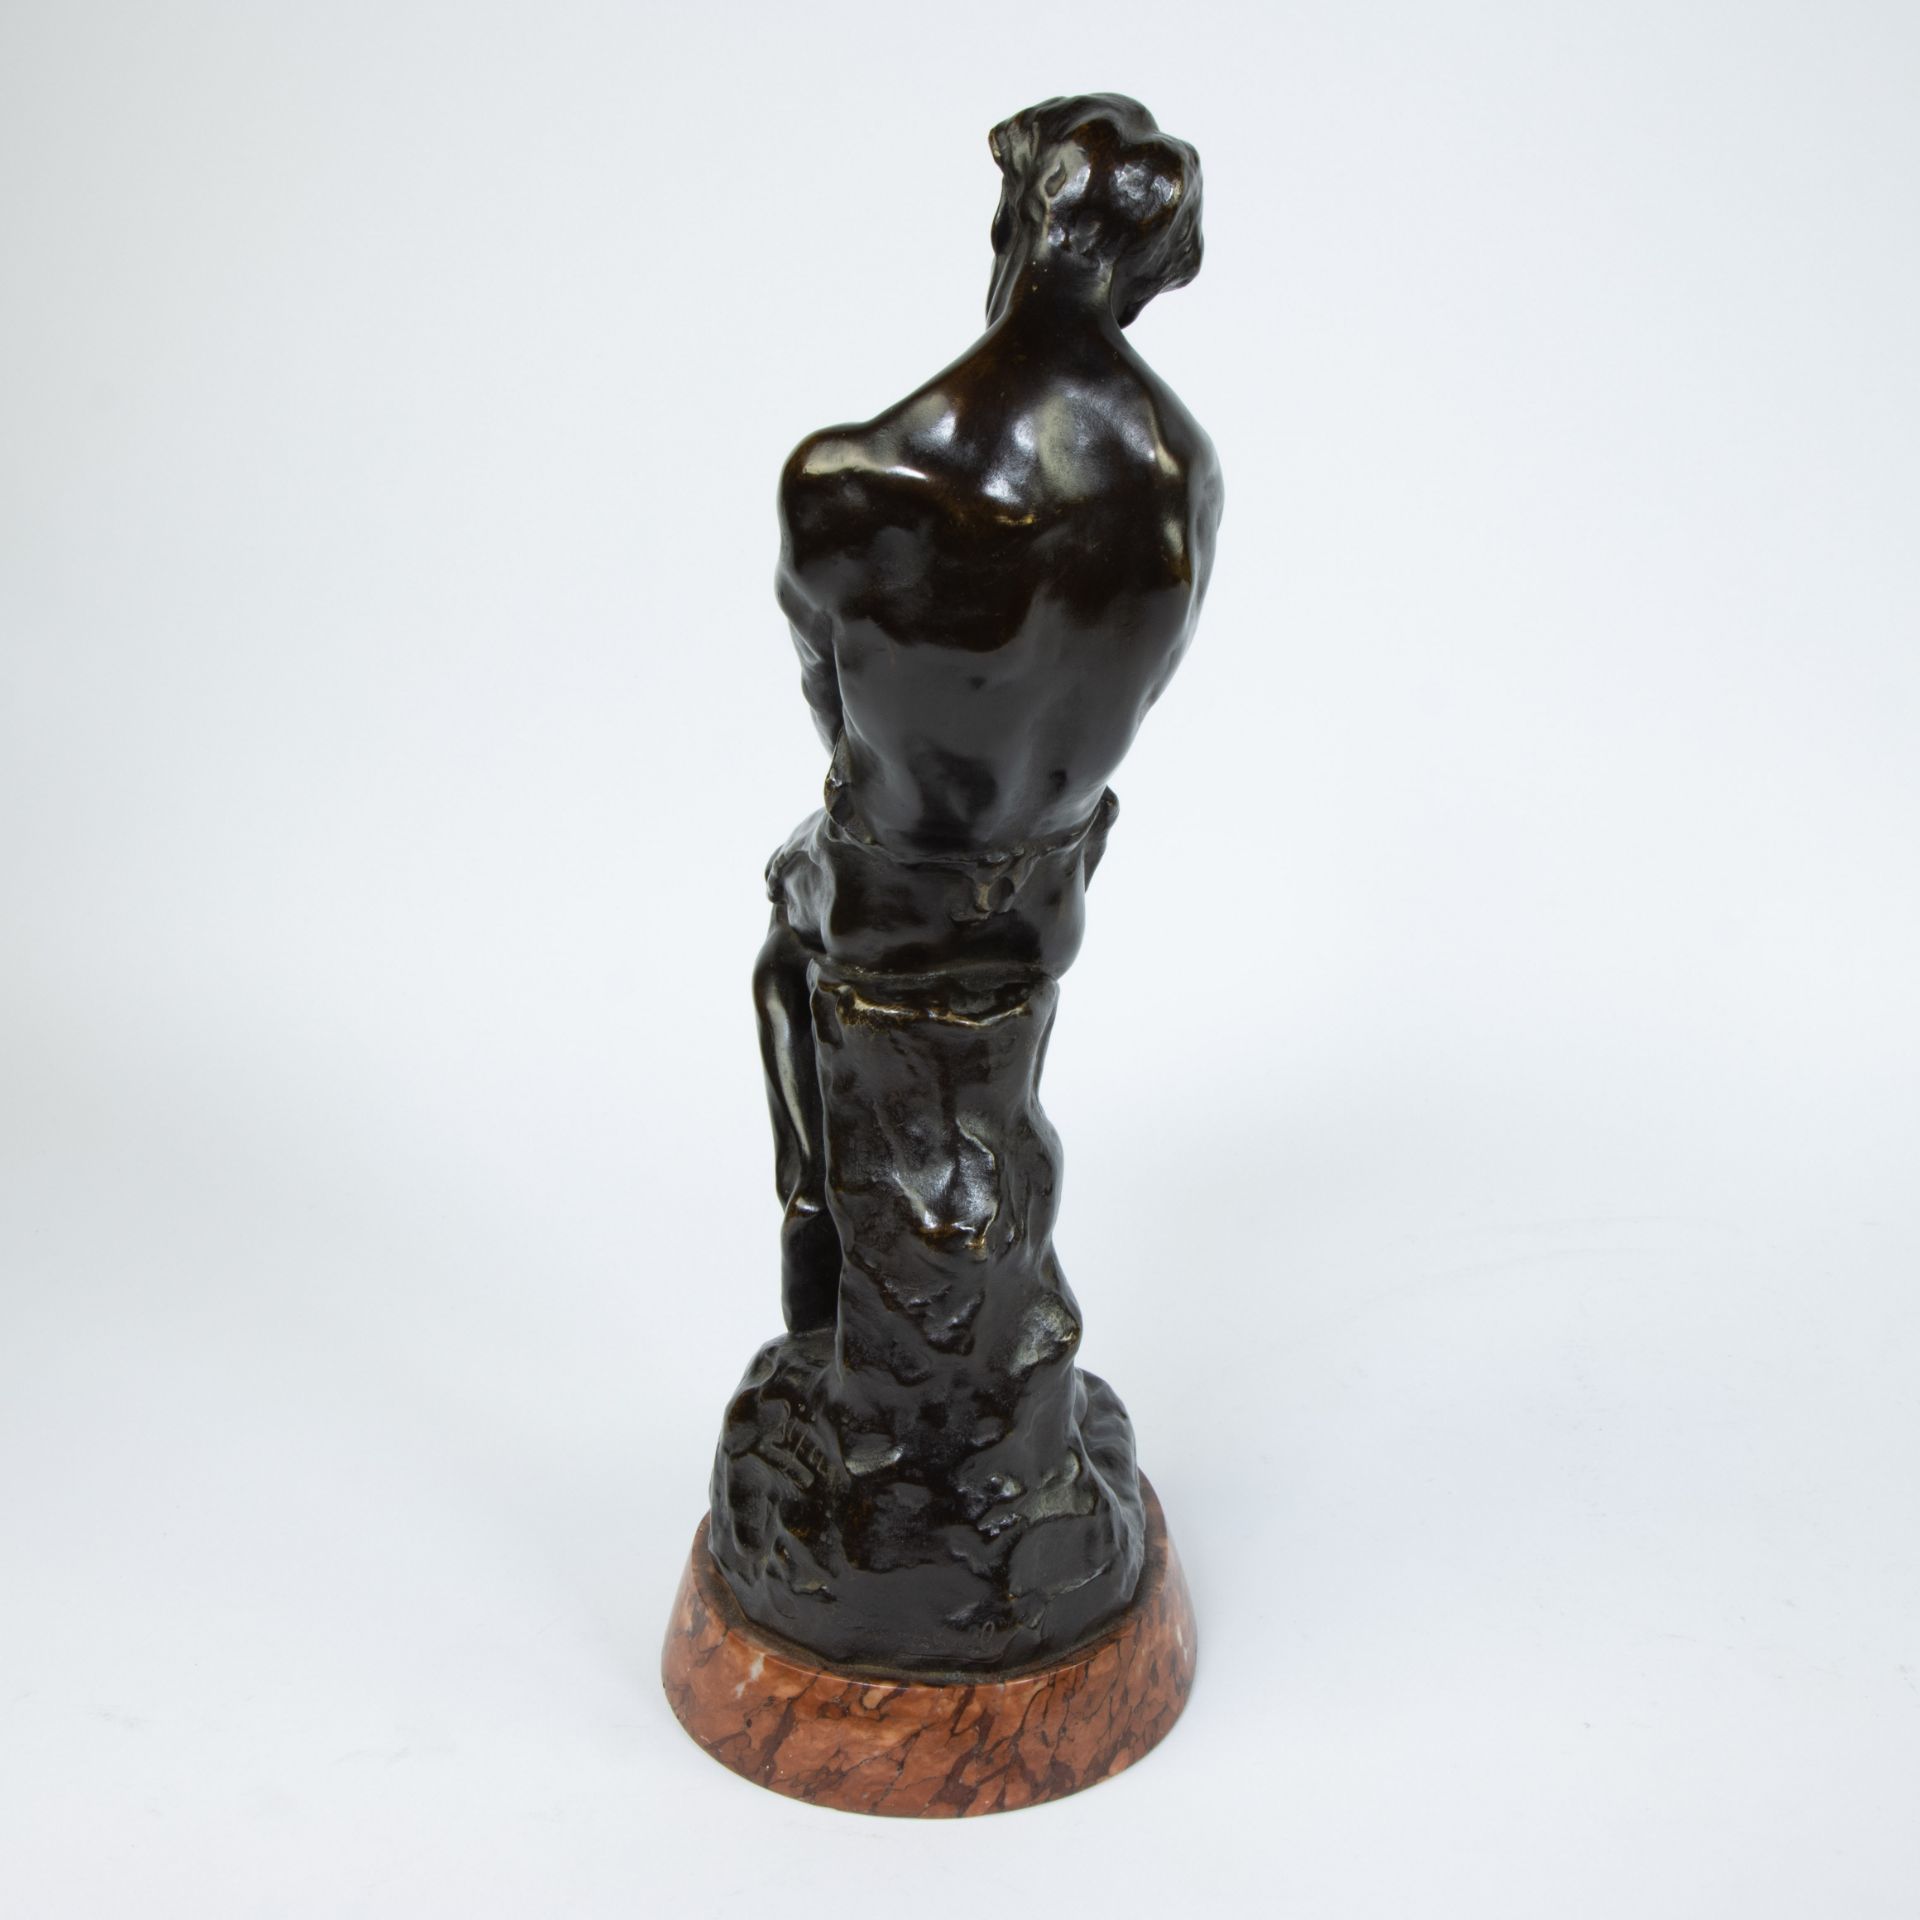 Voets & Vially (Victor VOETS (1882-1950), bronze statue of a woodworker, Bija foundry, signed - Image 3 of 6